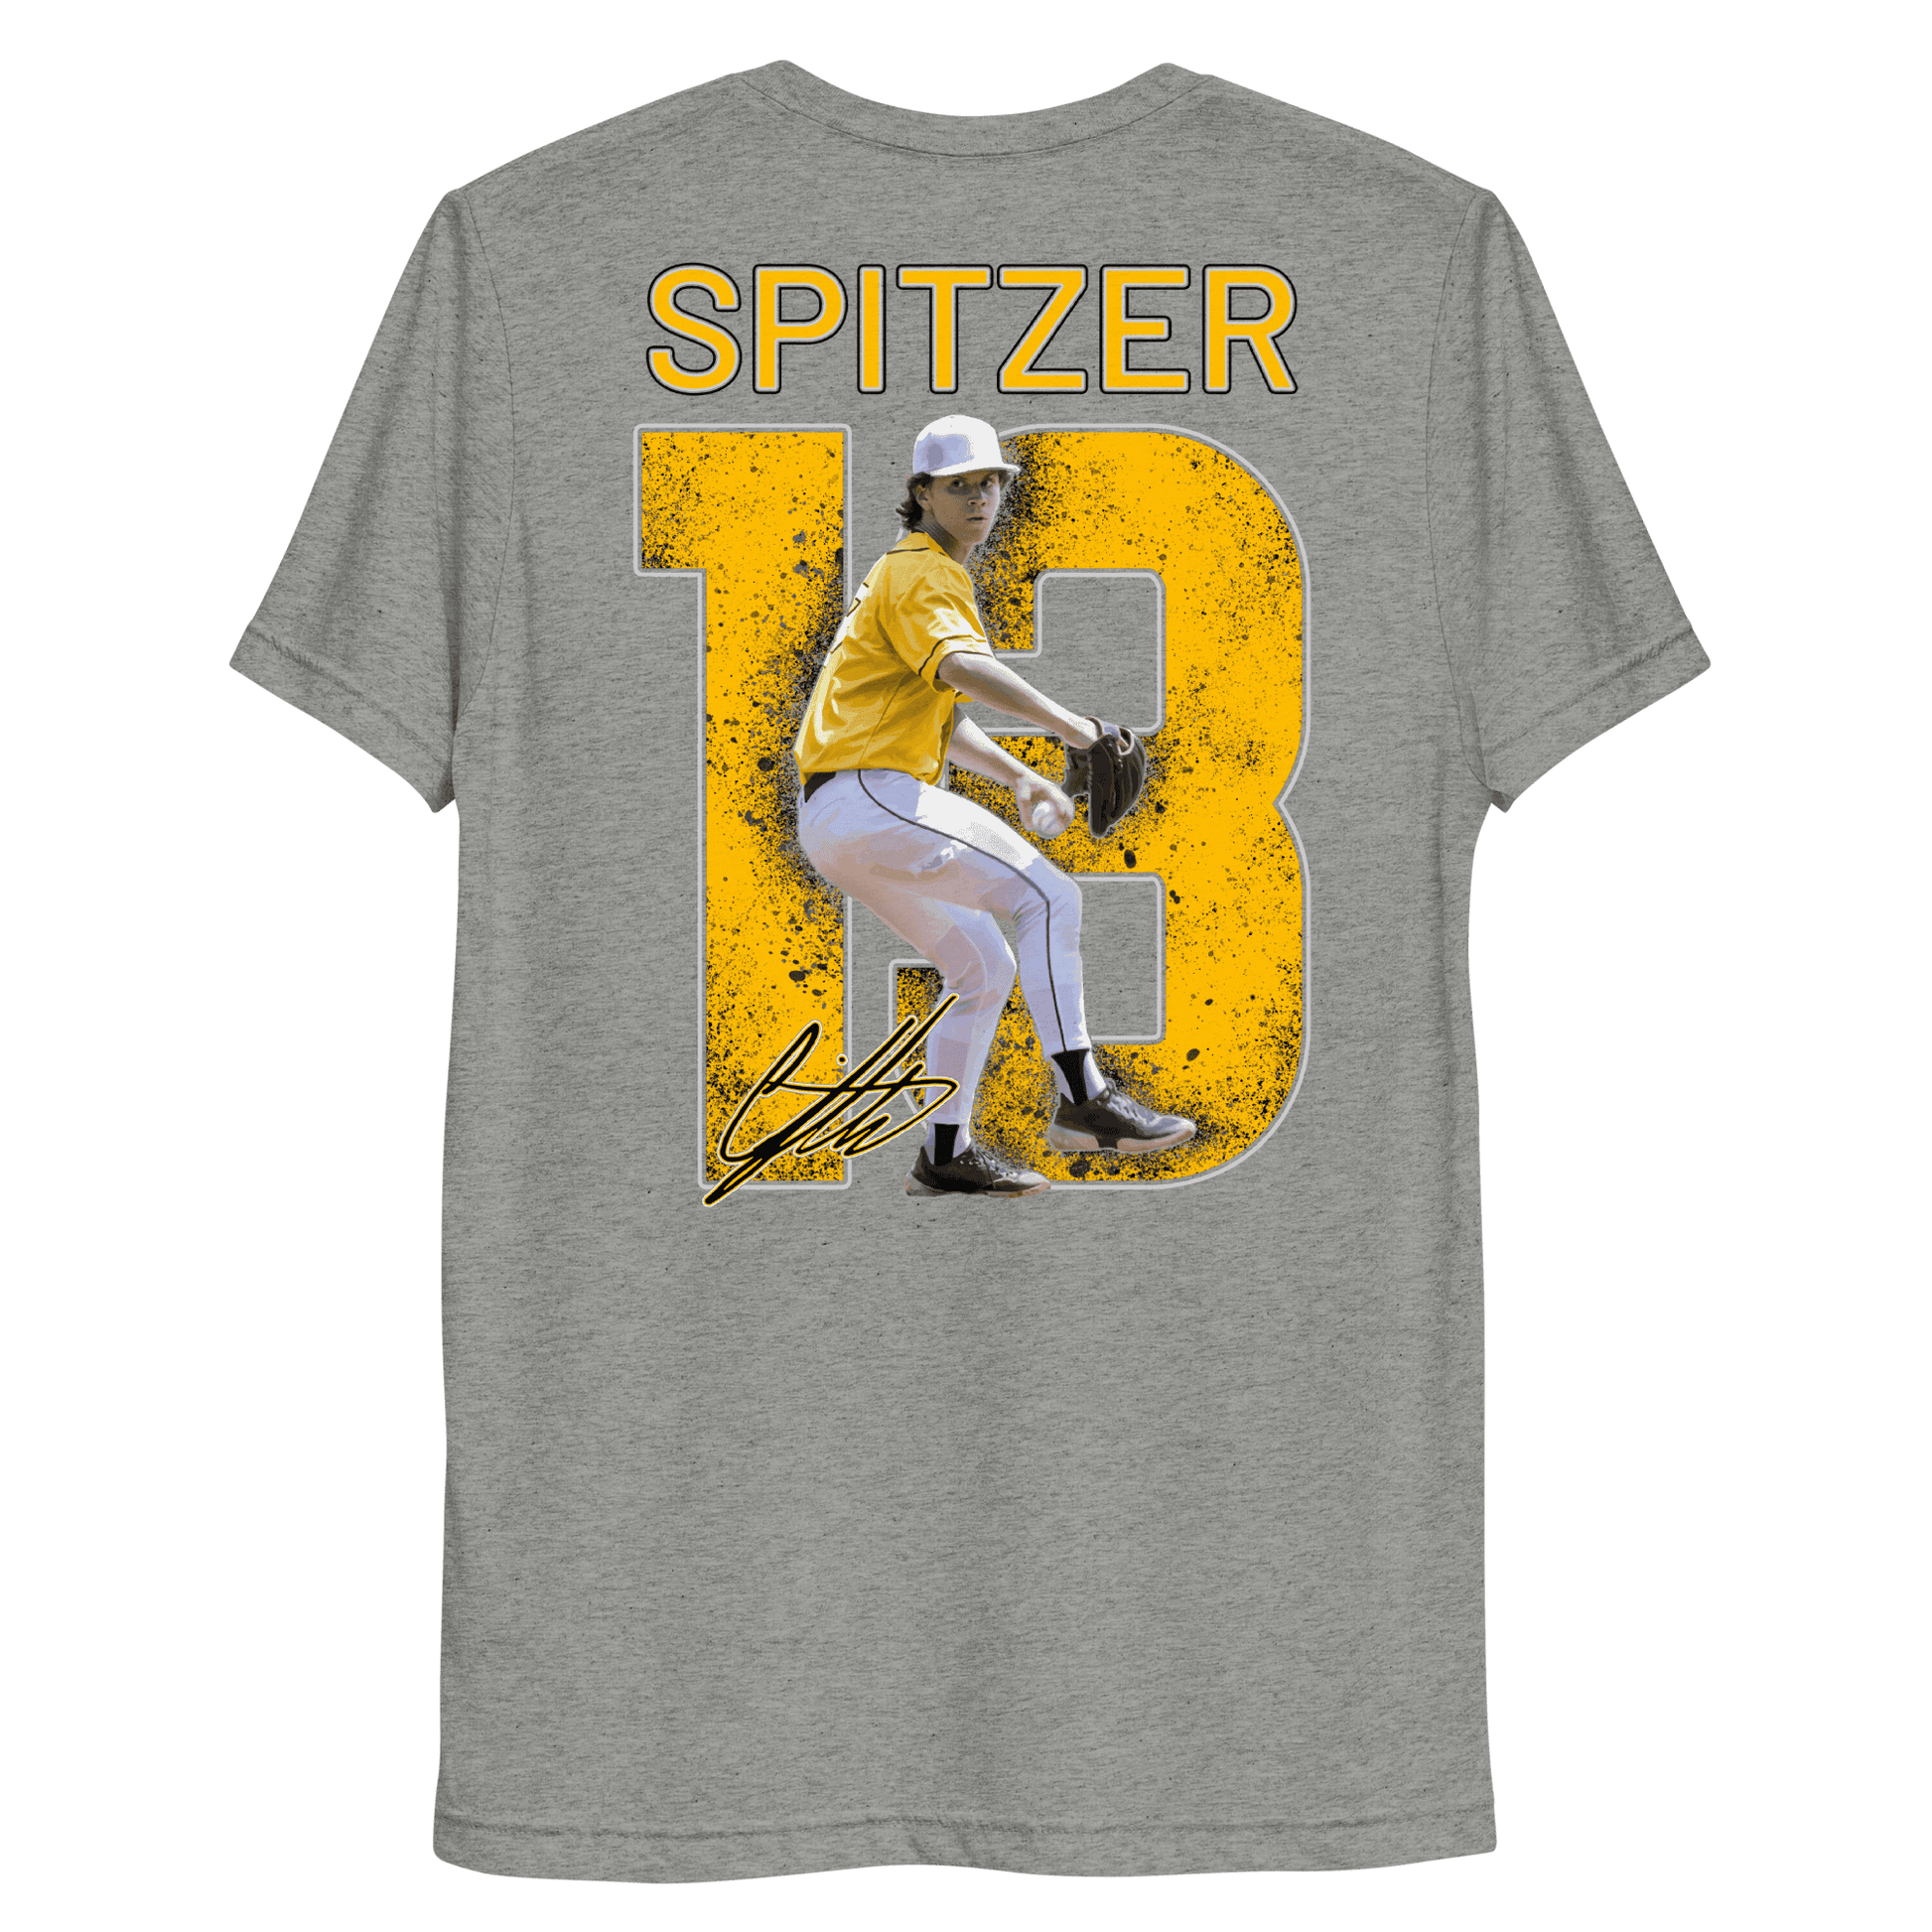 Cole Spitzer | Mural & Patch Performance Shirt - Clutch -